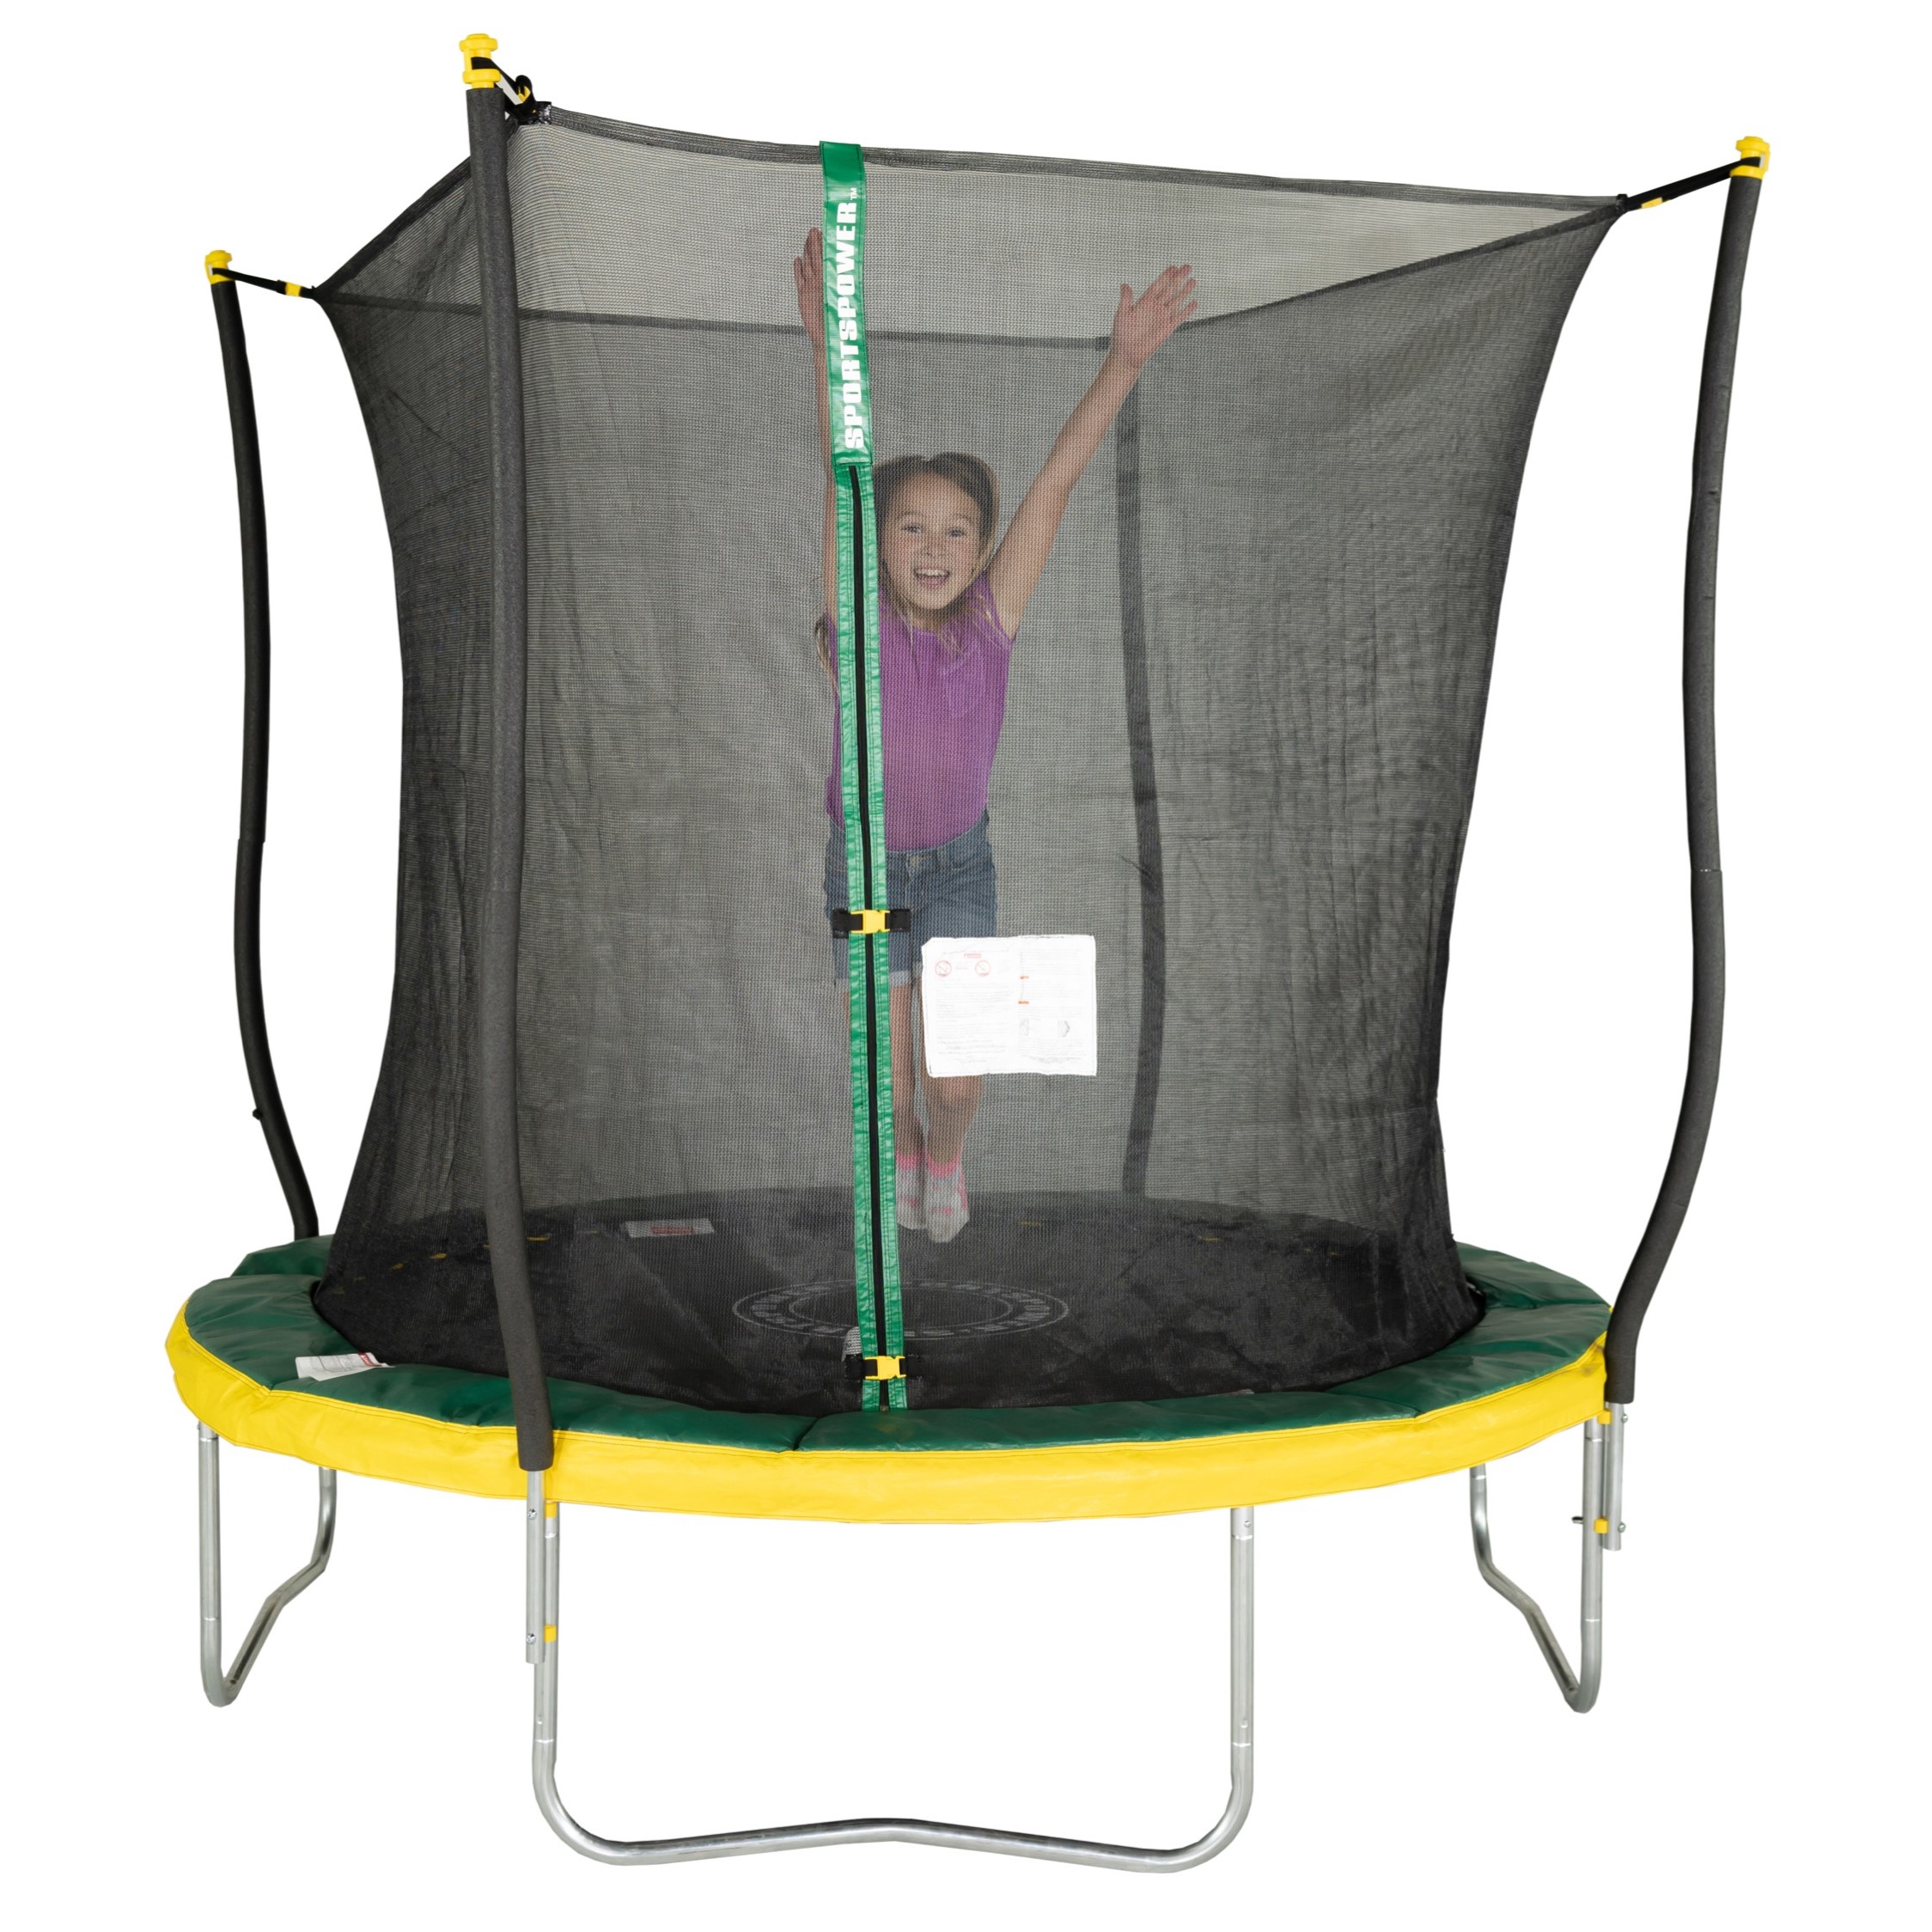 Bounce Pro 8-Foot Trampoline with Classic Enclosure and Flash Light Zone